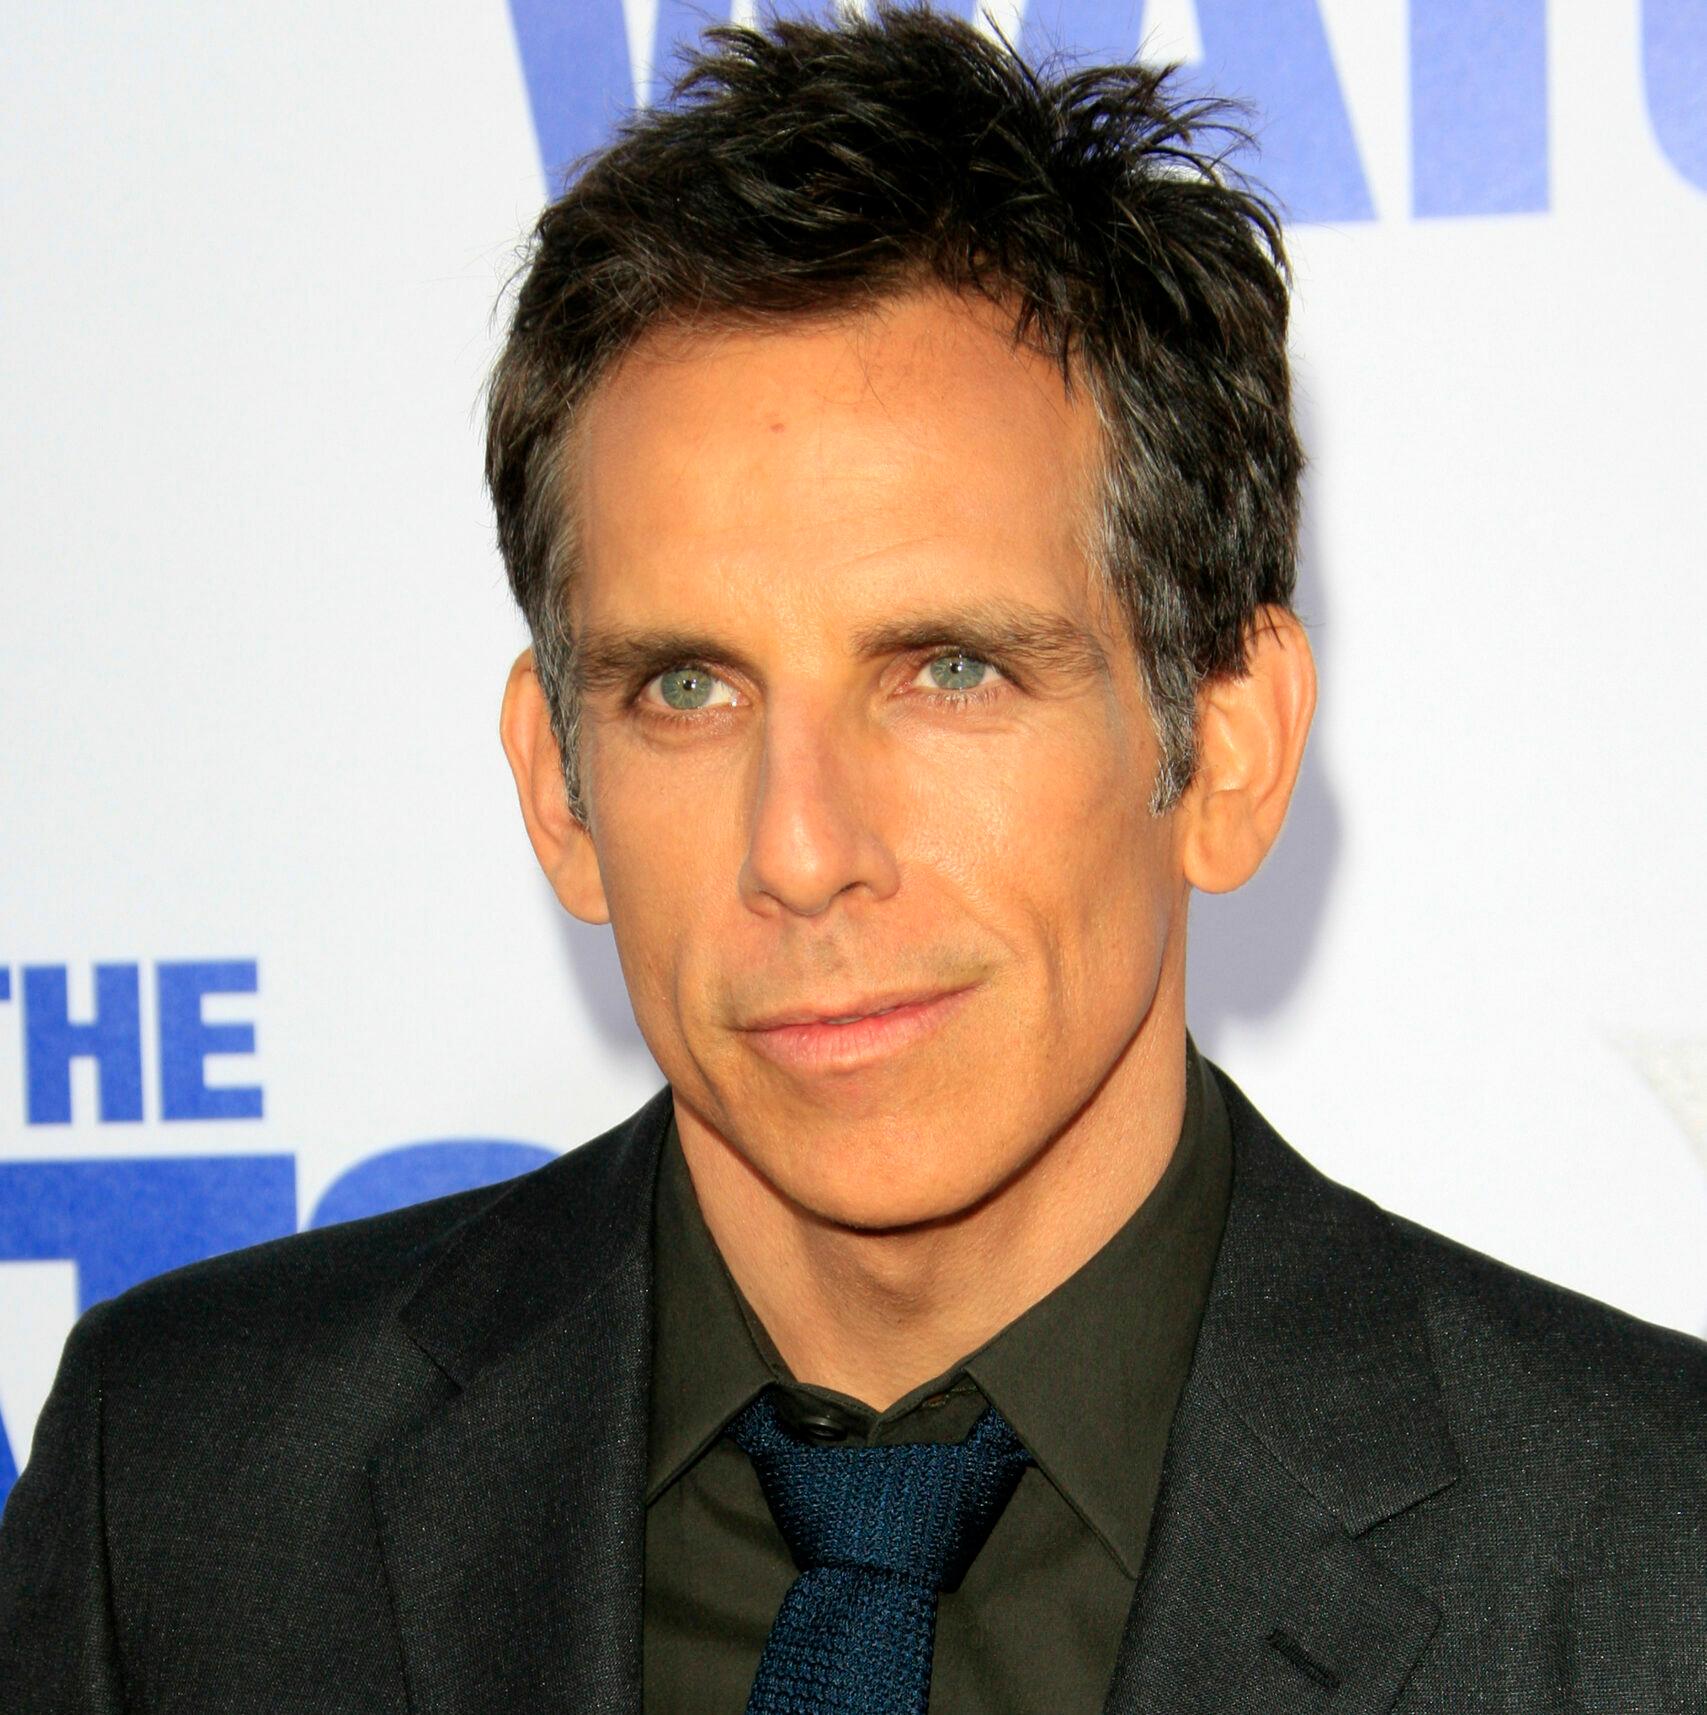 LOS ANGELES - JUN 23: Ben Stiller at the "The Watch" Premiere at the Chinese.